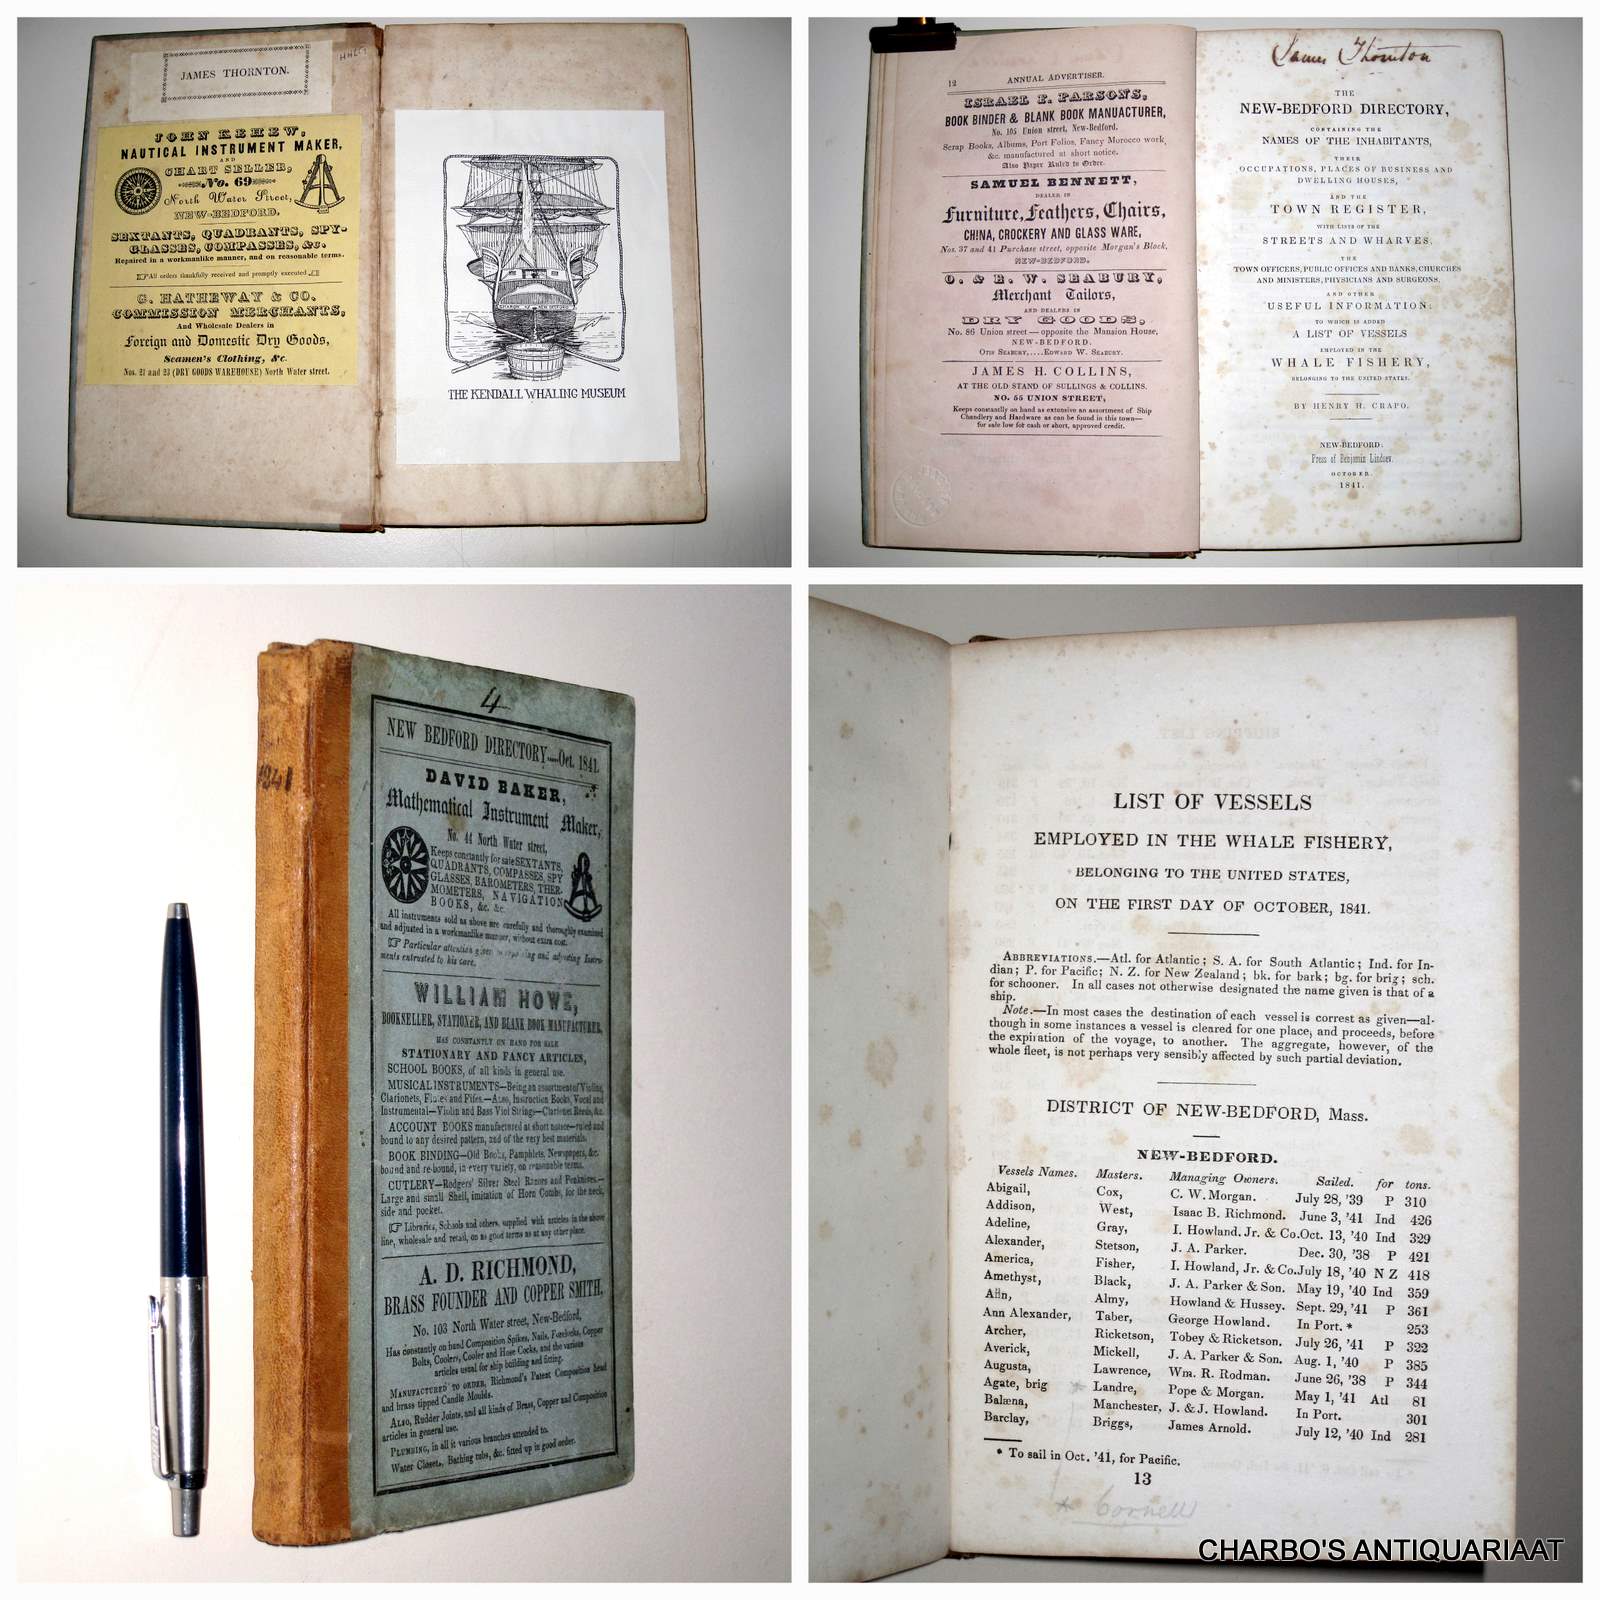 CRAPO, HENRY H., -  The New-Bedford directory, containing the names of the inhabitants, their occupations, places of business and dwelling houses, and the town register, with lists of the streets and wharves. To which is added a list of vessels employed in the whale fishery.